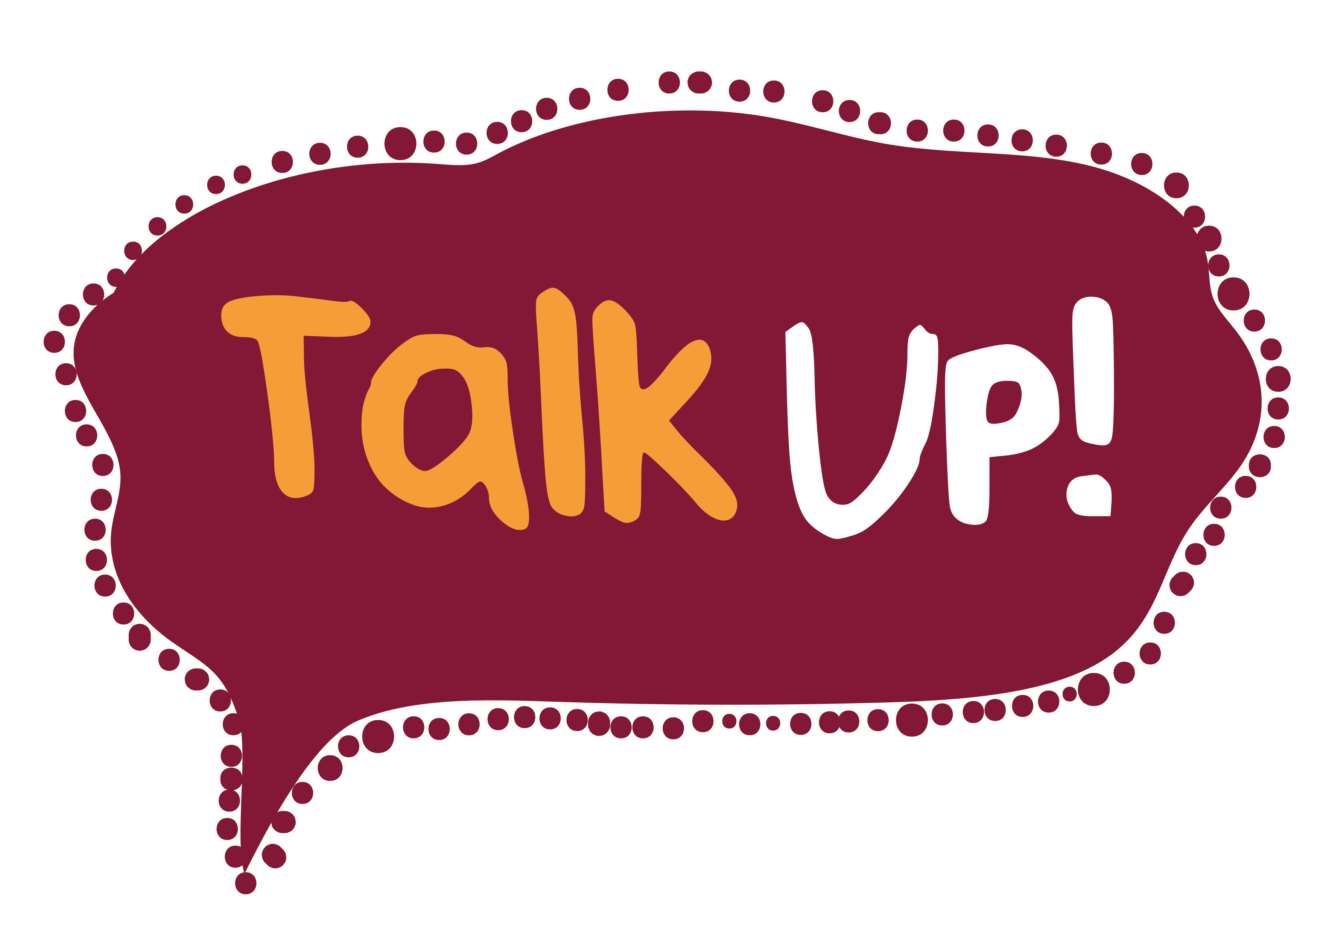 Talk Up art logo with some dot painting around it.